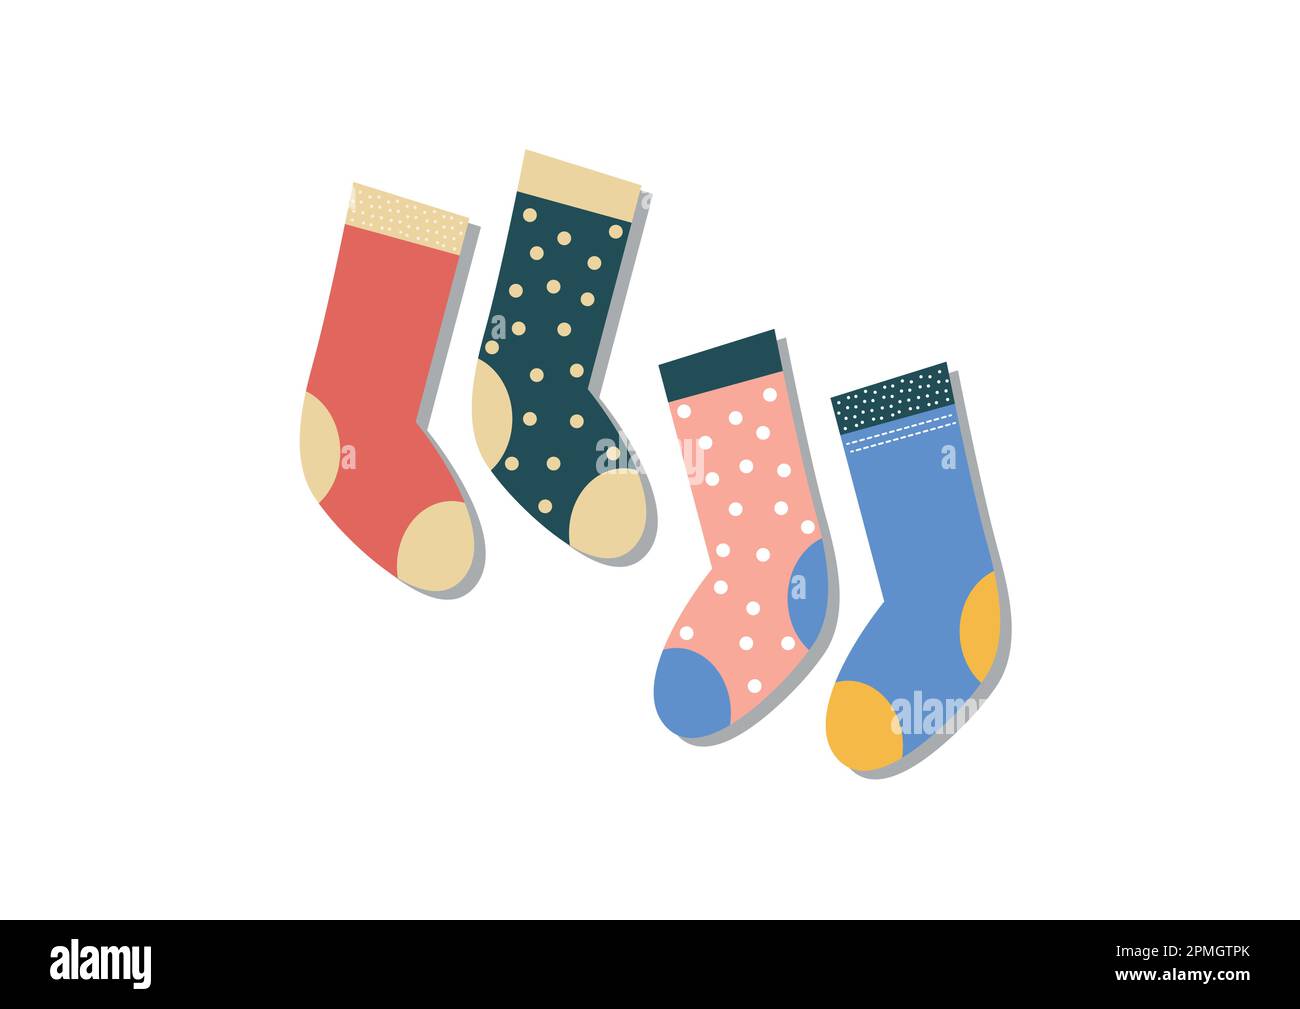 Premium Vector  Winter holiday socks with patterns. christmas socks. in  flat cartoon style.